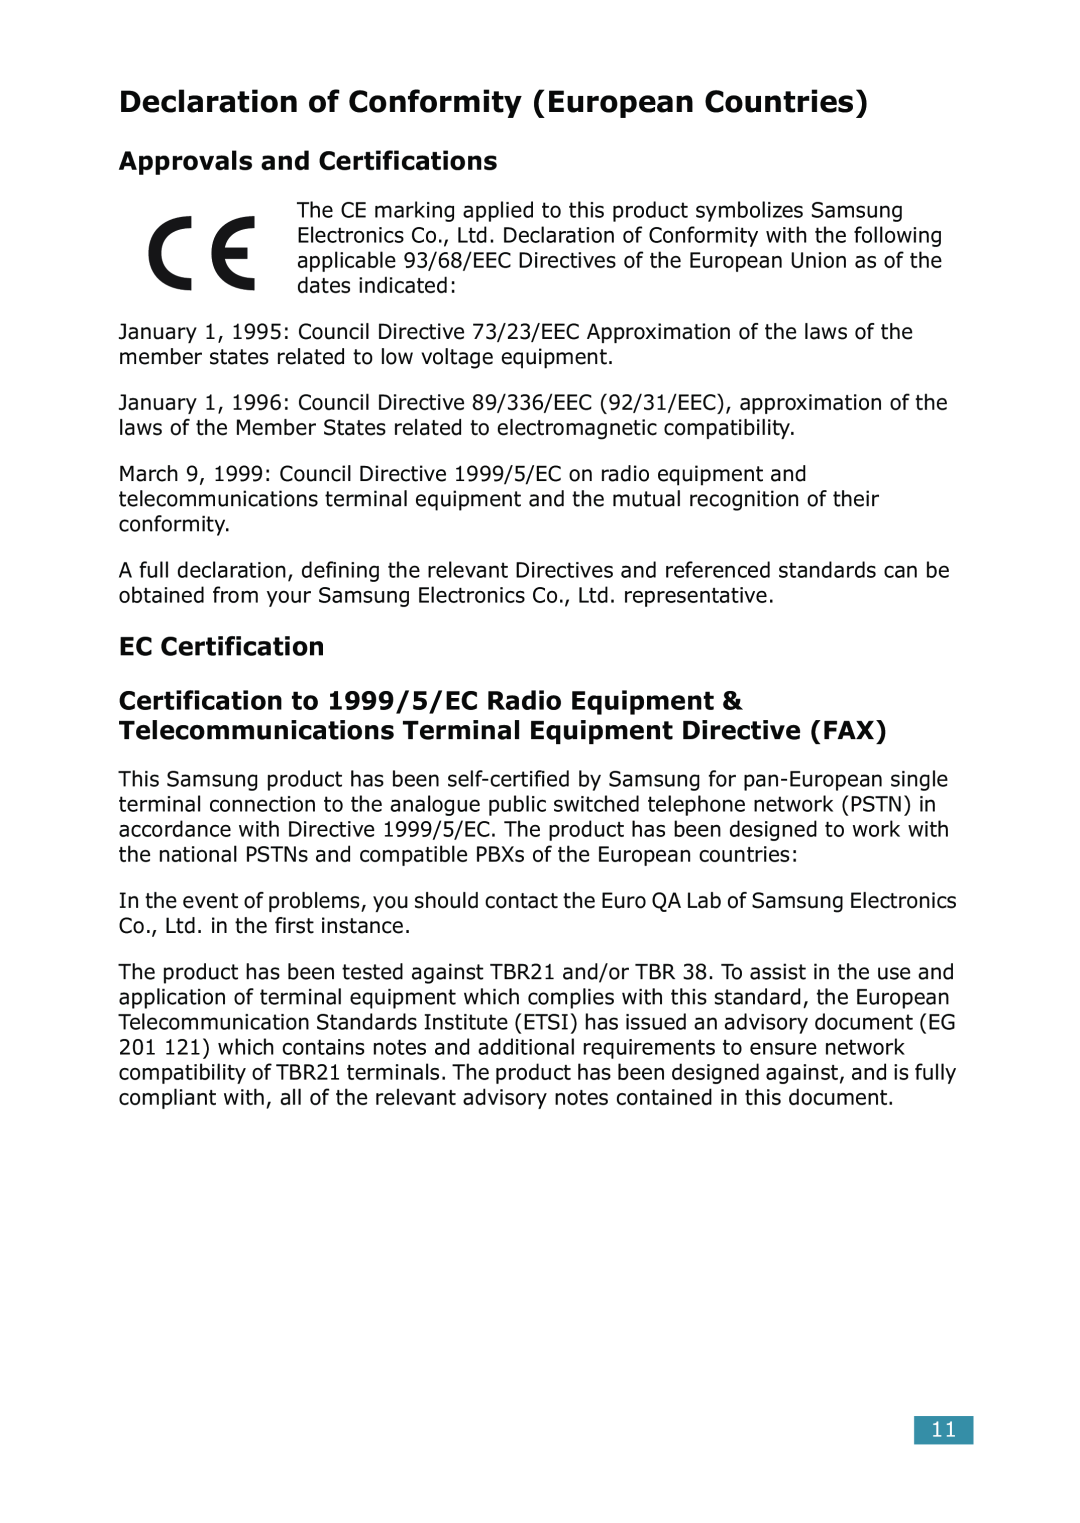 Samsung ML-1520 manual Declaration of Conformity European Countries, Approvals and Certifications, EC Certification 